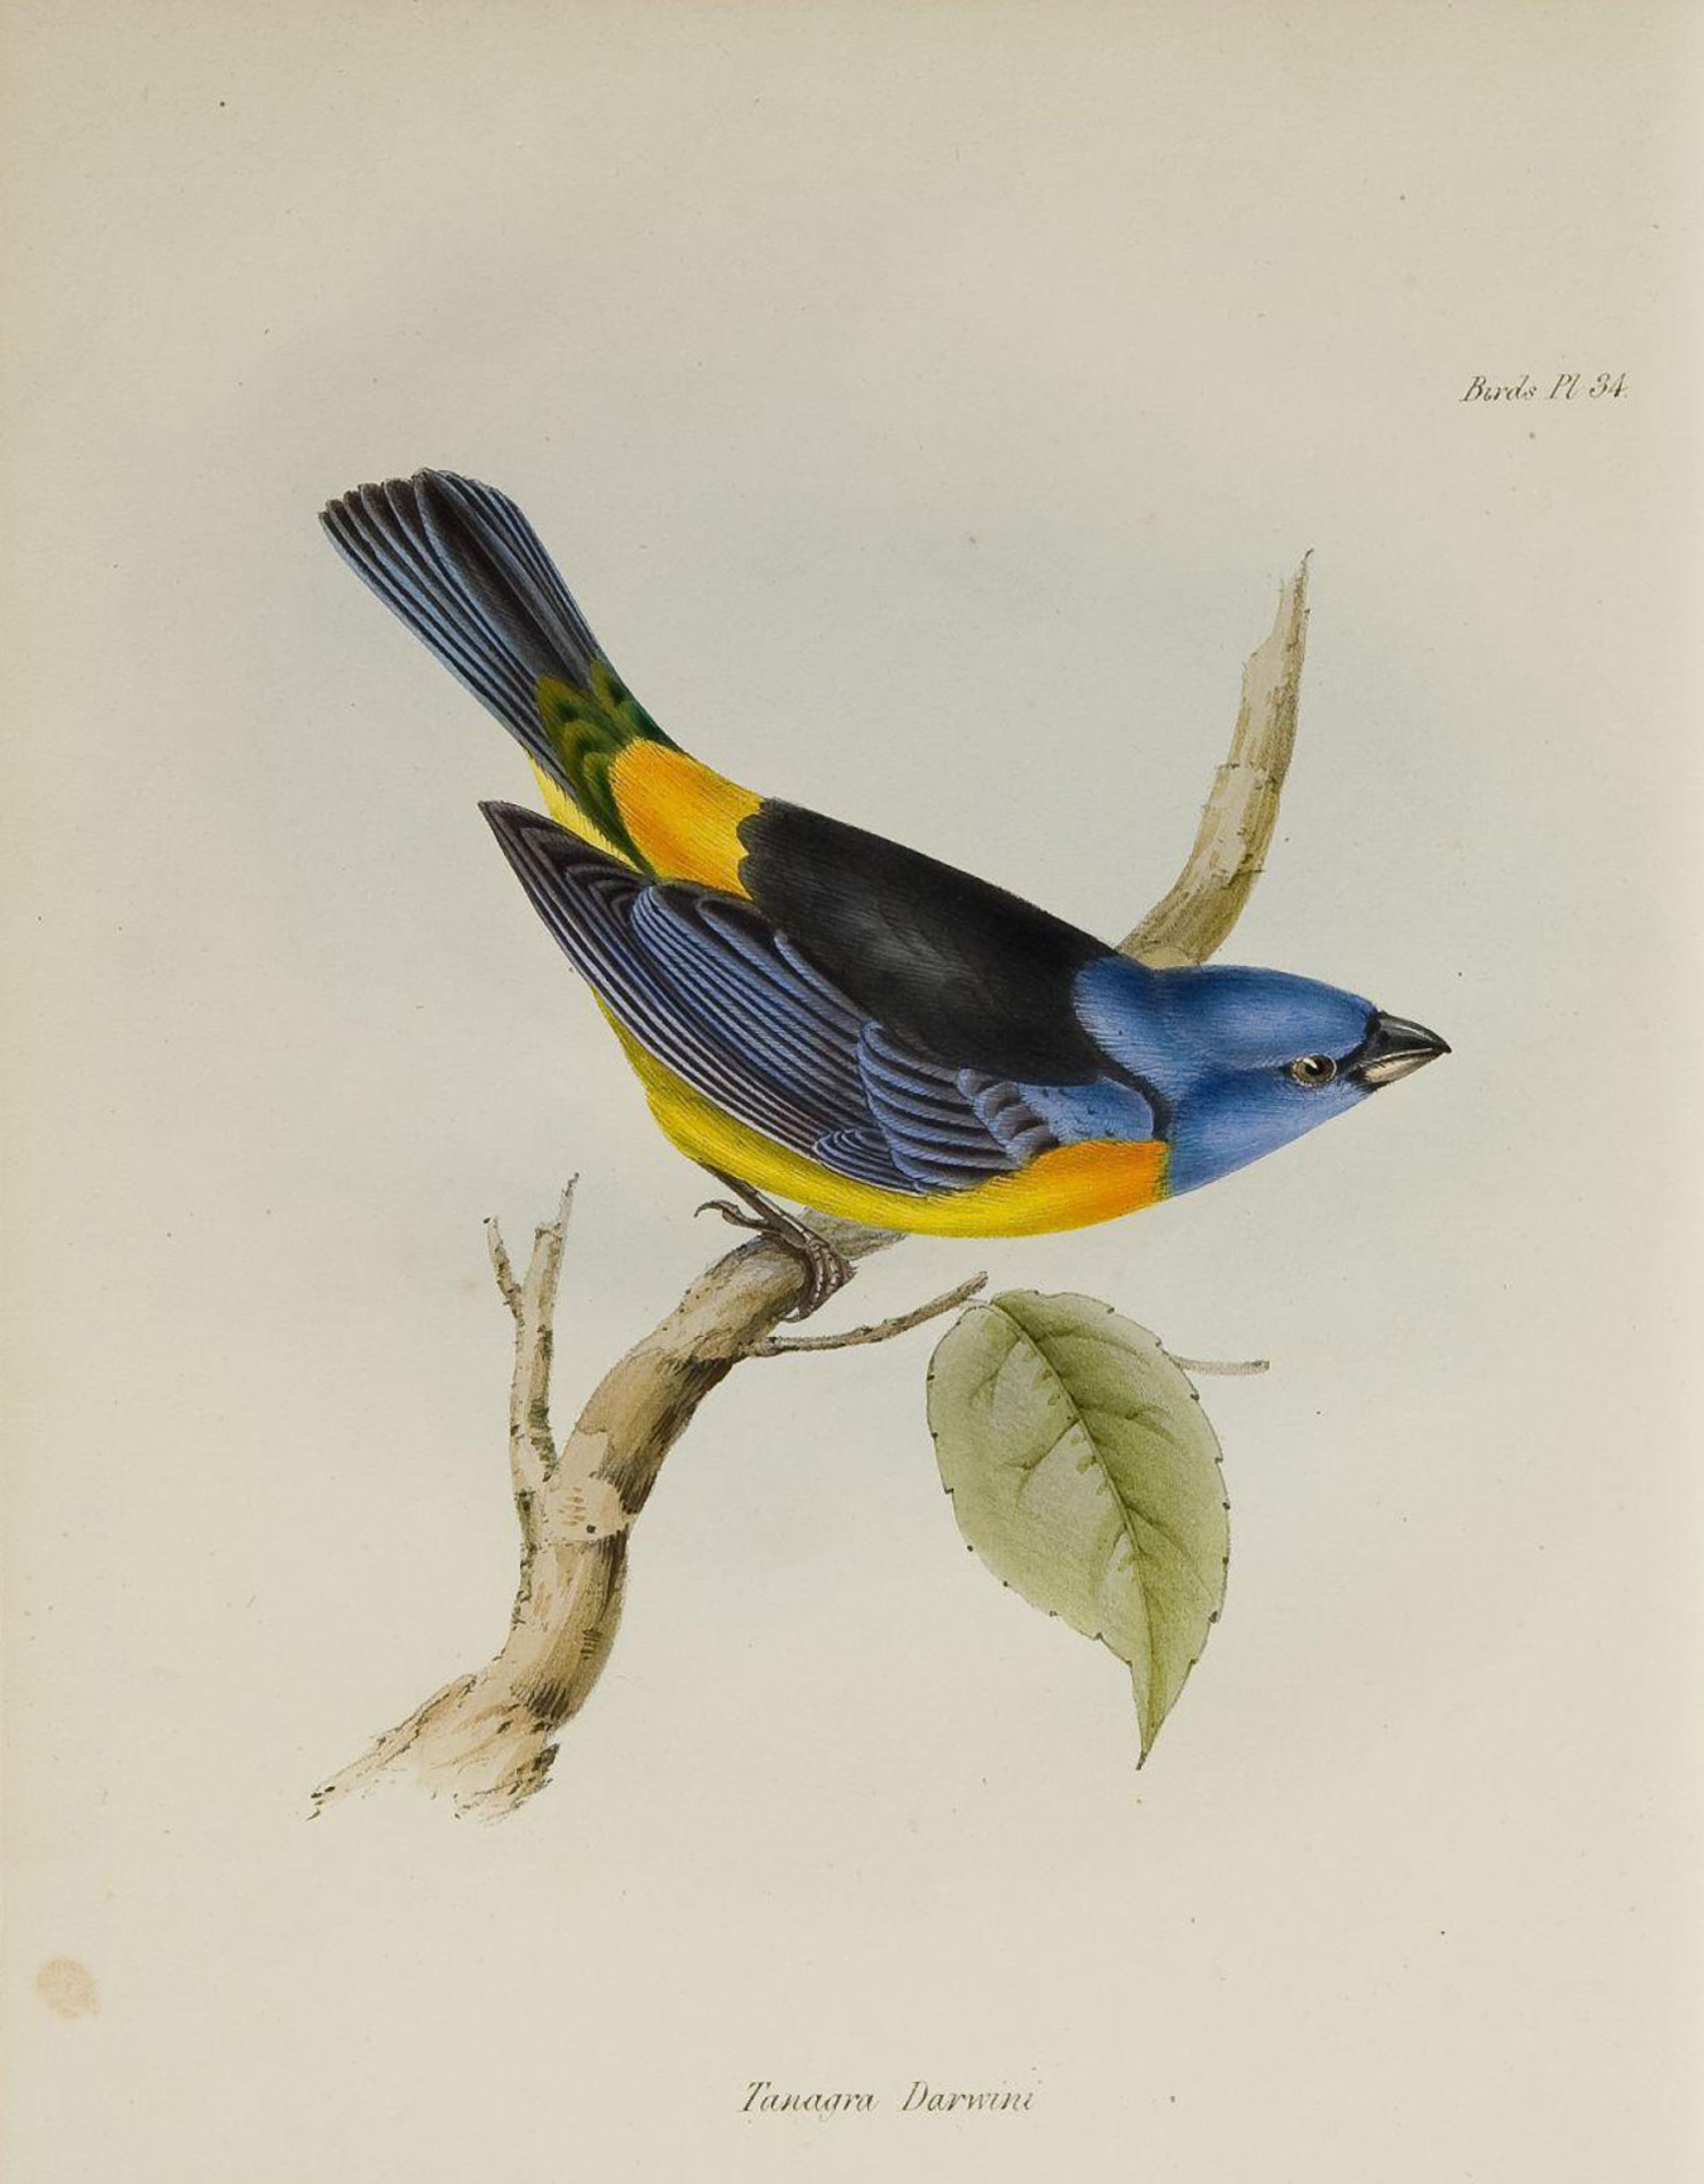 Elizabeth Gould, Tanagra Darwini in 'The Zoology of the Voyage of H.M.S. Beagle', 1839-1843.